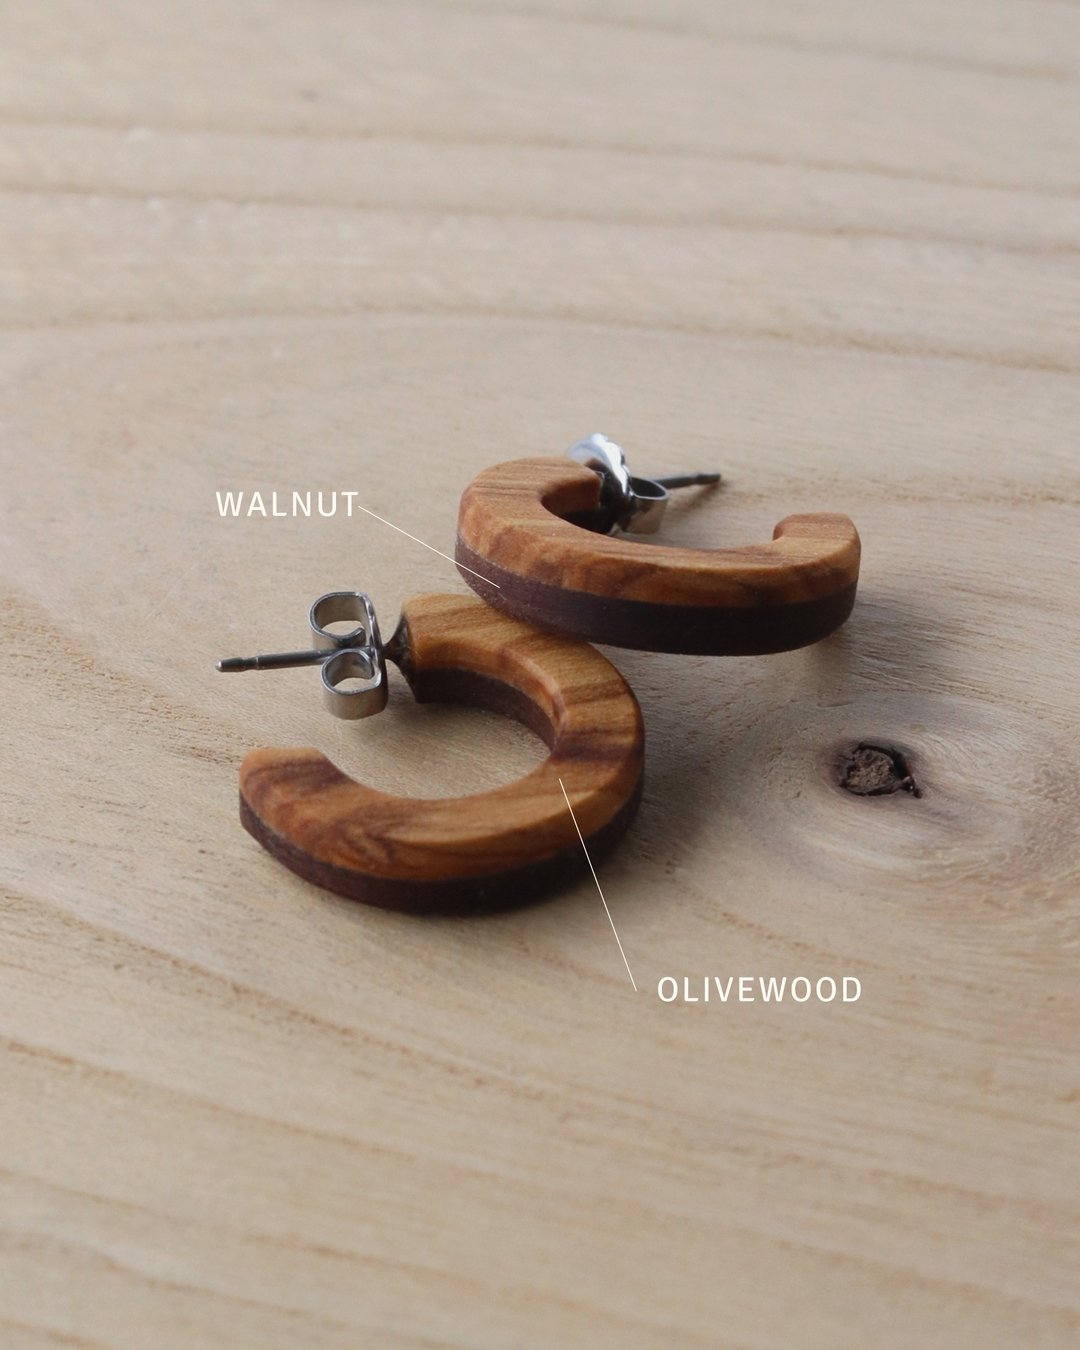 We intentionally design wears that are classic in style and versatile in function, ensuring many different ways for maximum use and longevity. These hoops feature different wood on each side, so there are multiple ways to style one set. 

Swipe throu